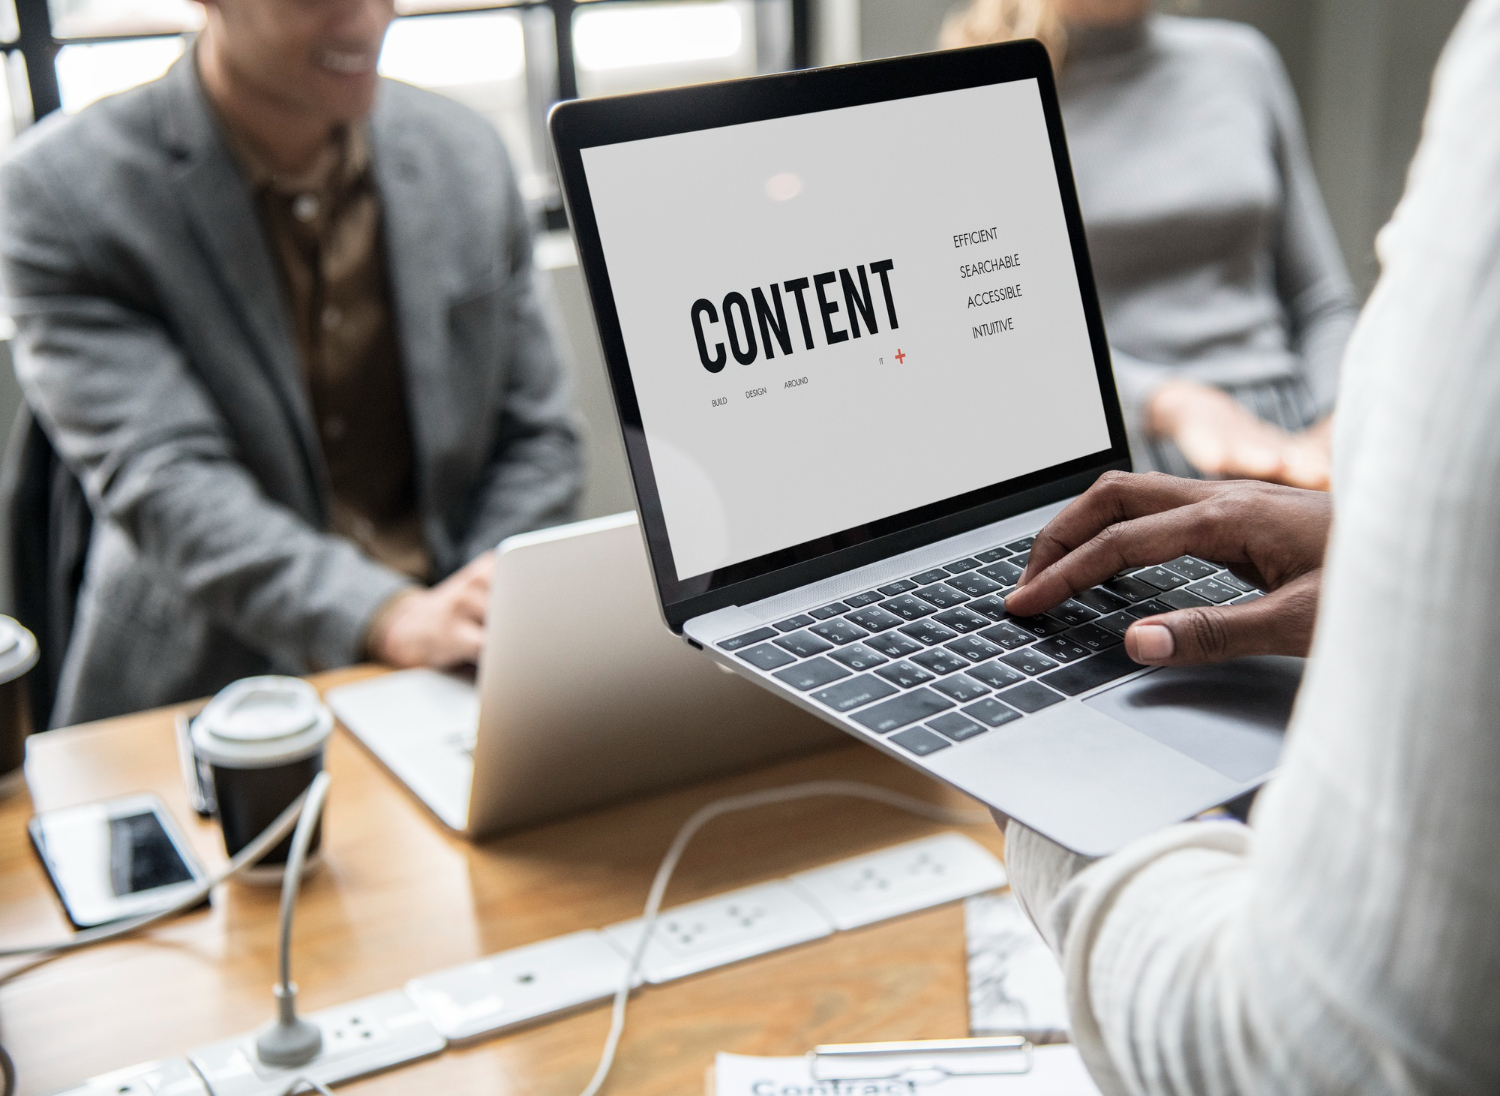 How to Use Content Writing to Attract and Retain Customers